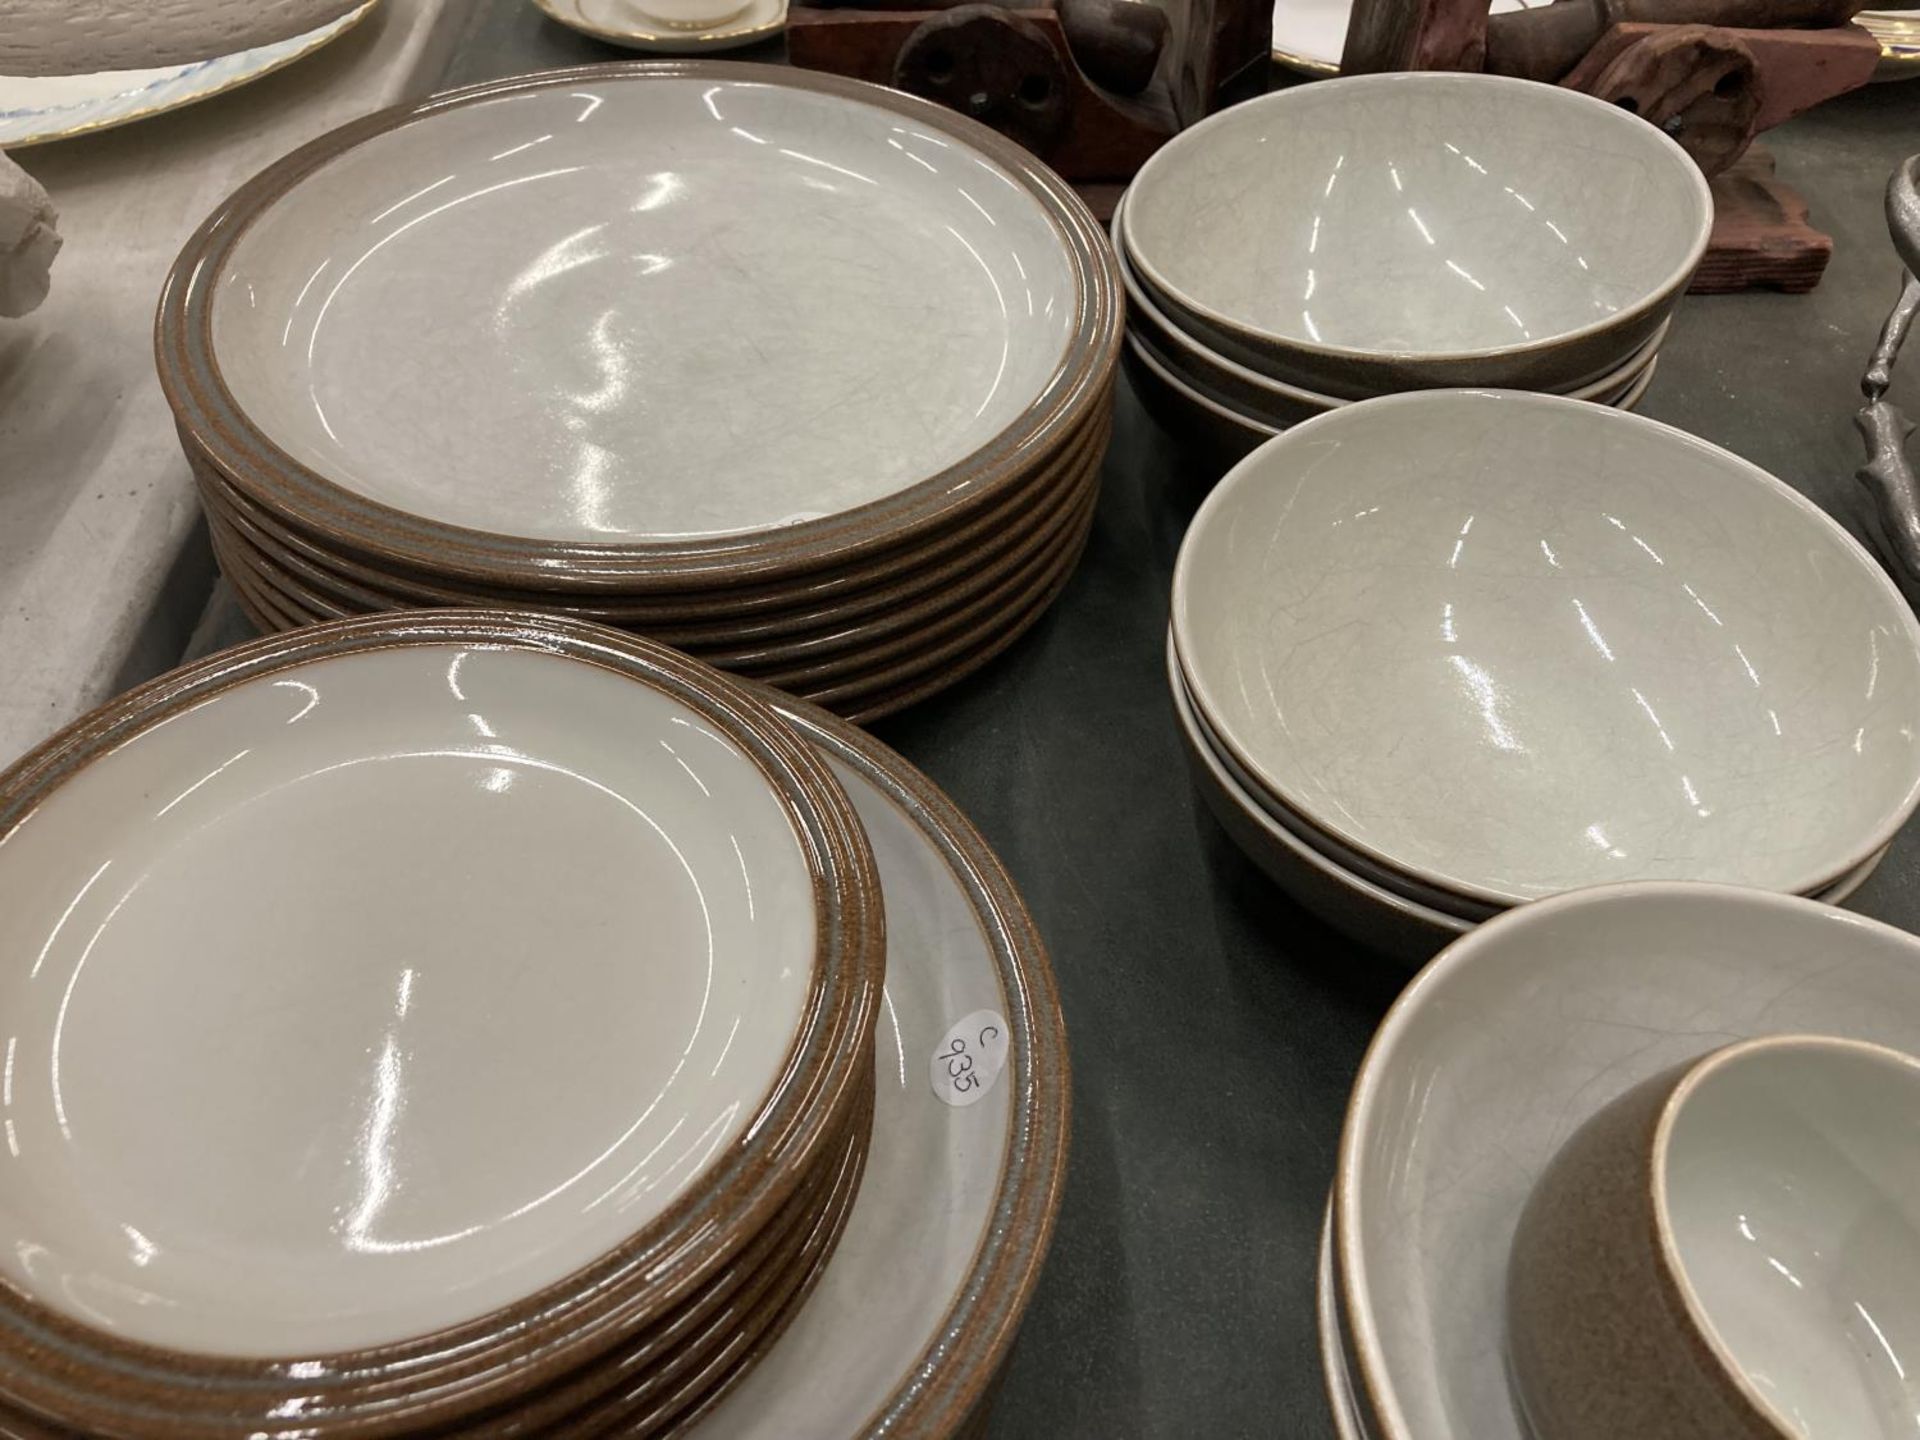 A PART DENBY DINNER SERVICE TO INCLUDE DINNER AND SIDE PLATES, BOWLS, CUPS AND SAUCERS - 33 PIECES - Image 4 of 5